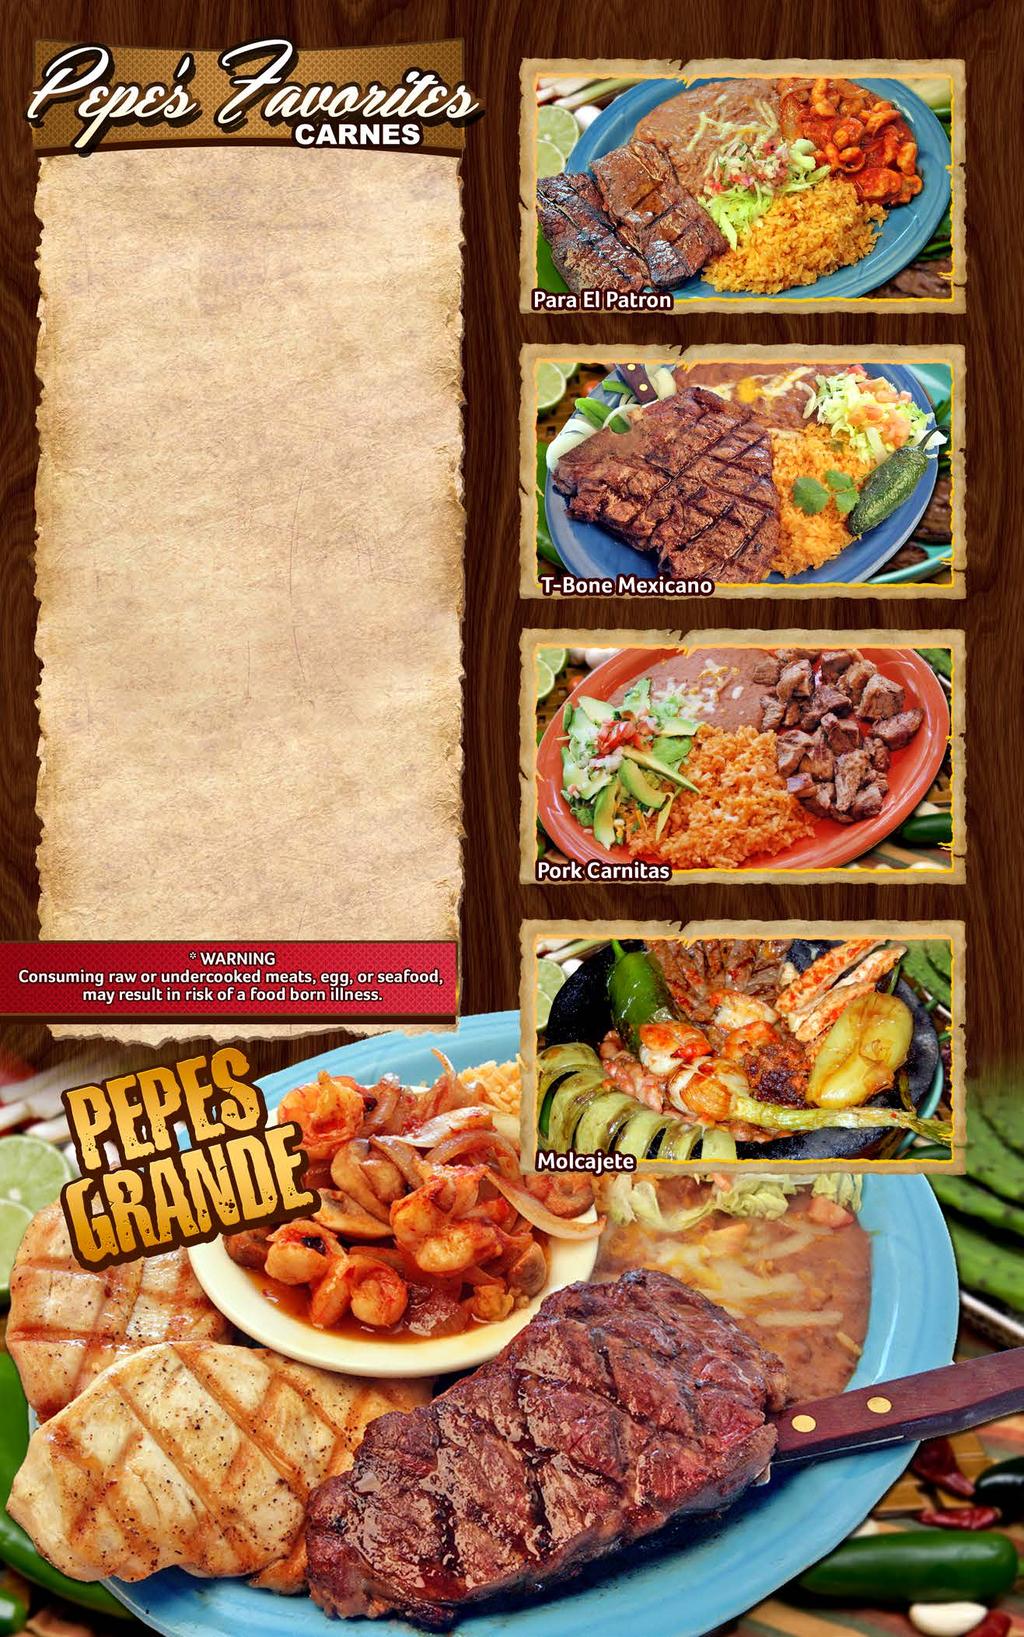 MEATS ARE COOKED TO CHOICE PARA EL PATRON 15.75 For the Boss Carne asada cooked over the charcoal served with your choice of prawns diabla or mojo de ajo. PEPE S GRANDE 16.